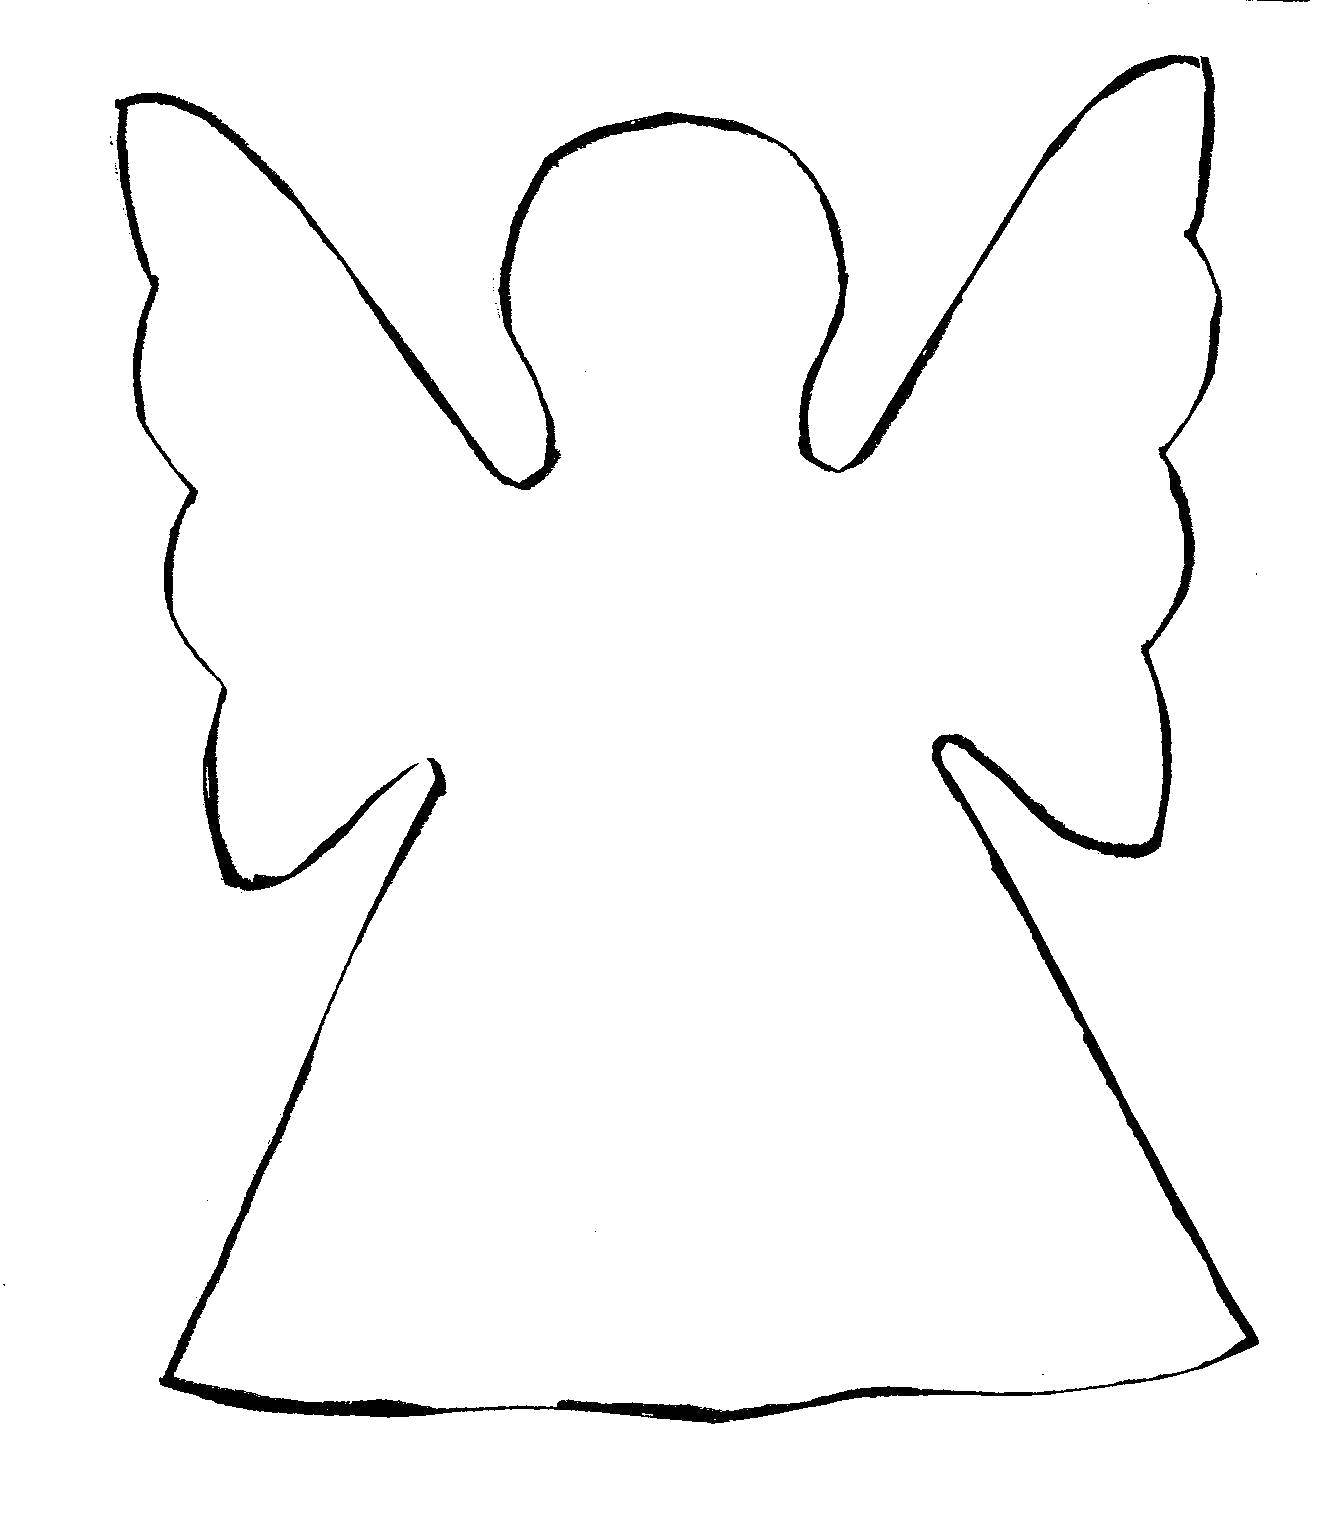 Coloring Angel. Category The contours of the angel to clip. Tags:  Angel .